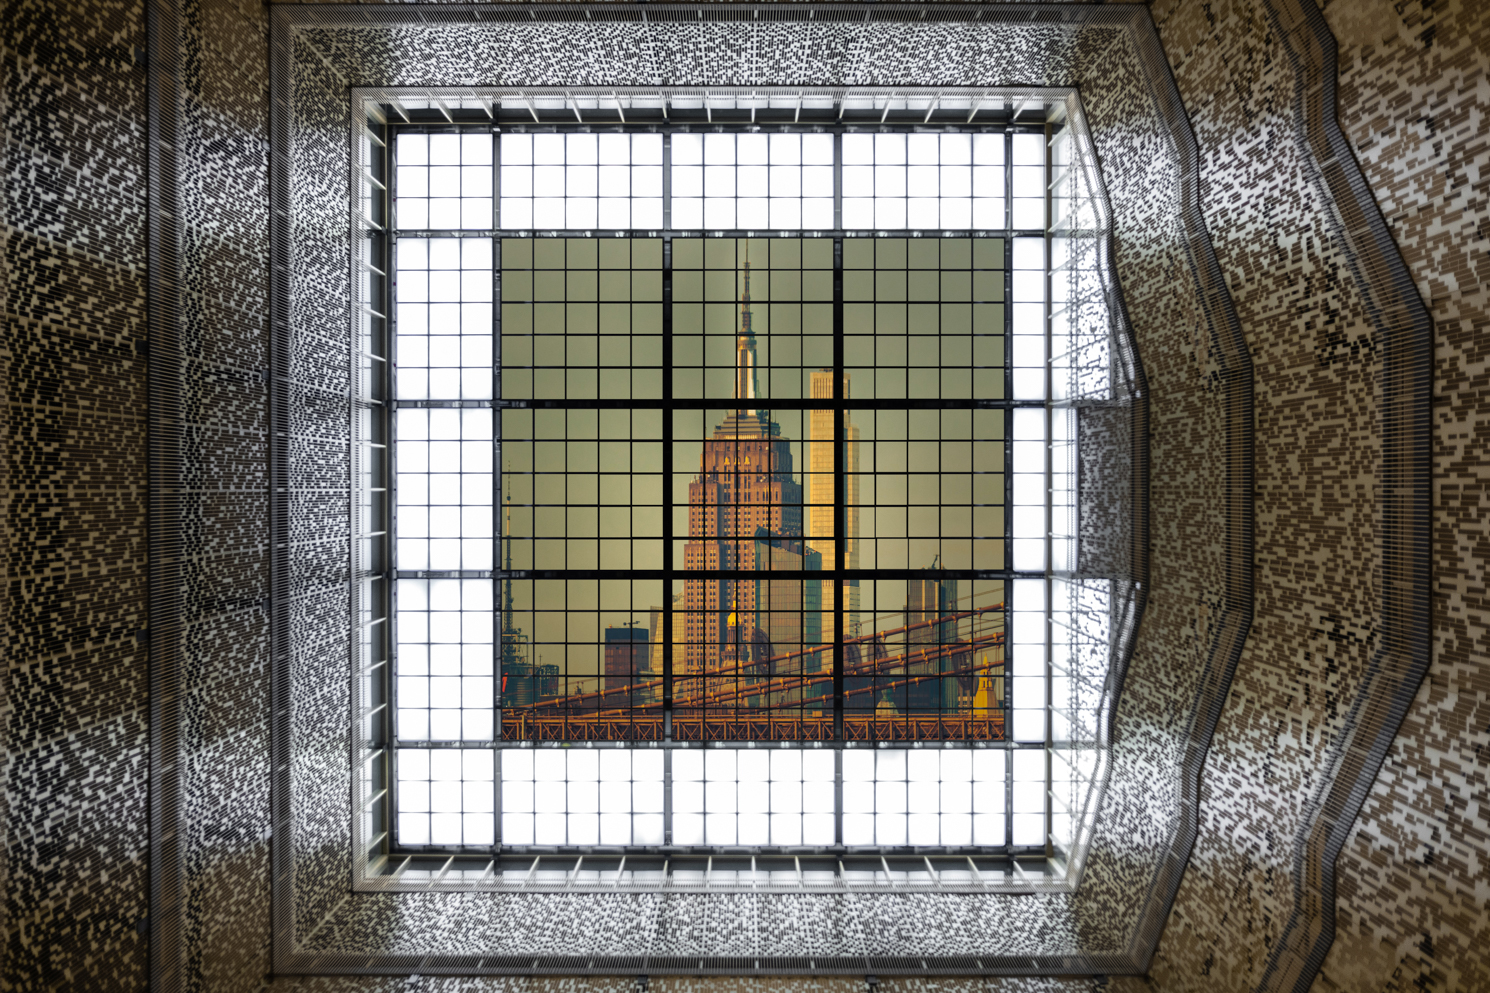 The ceiling of Bobst Library atrium overlaid with a picture of the Empire State Building.